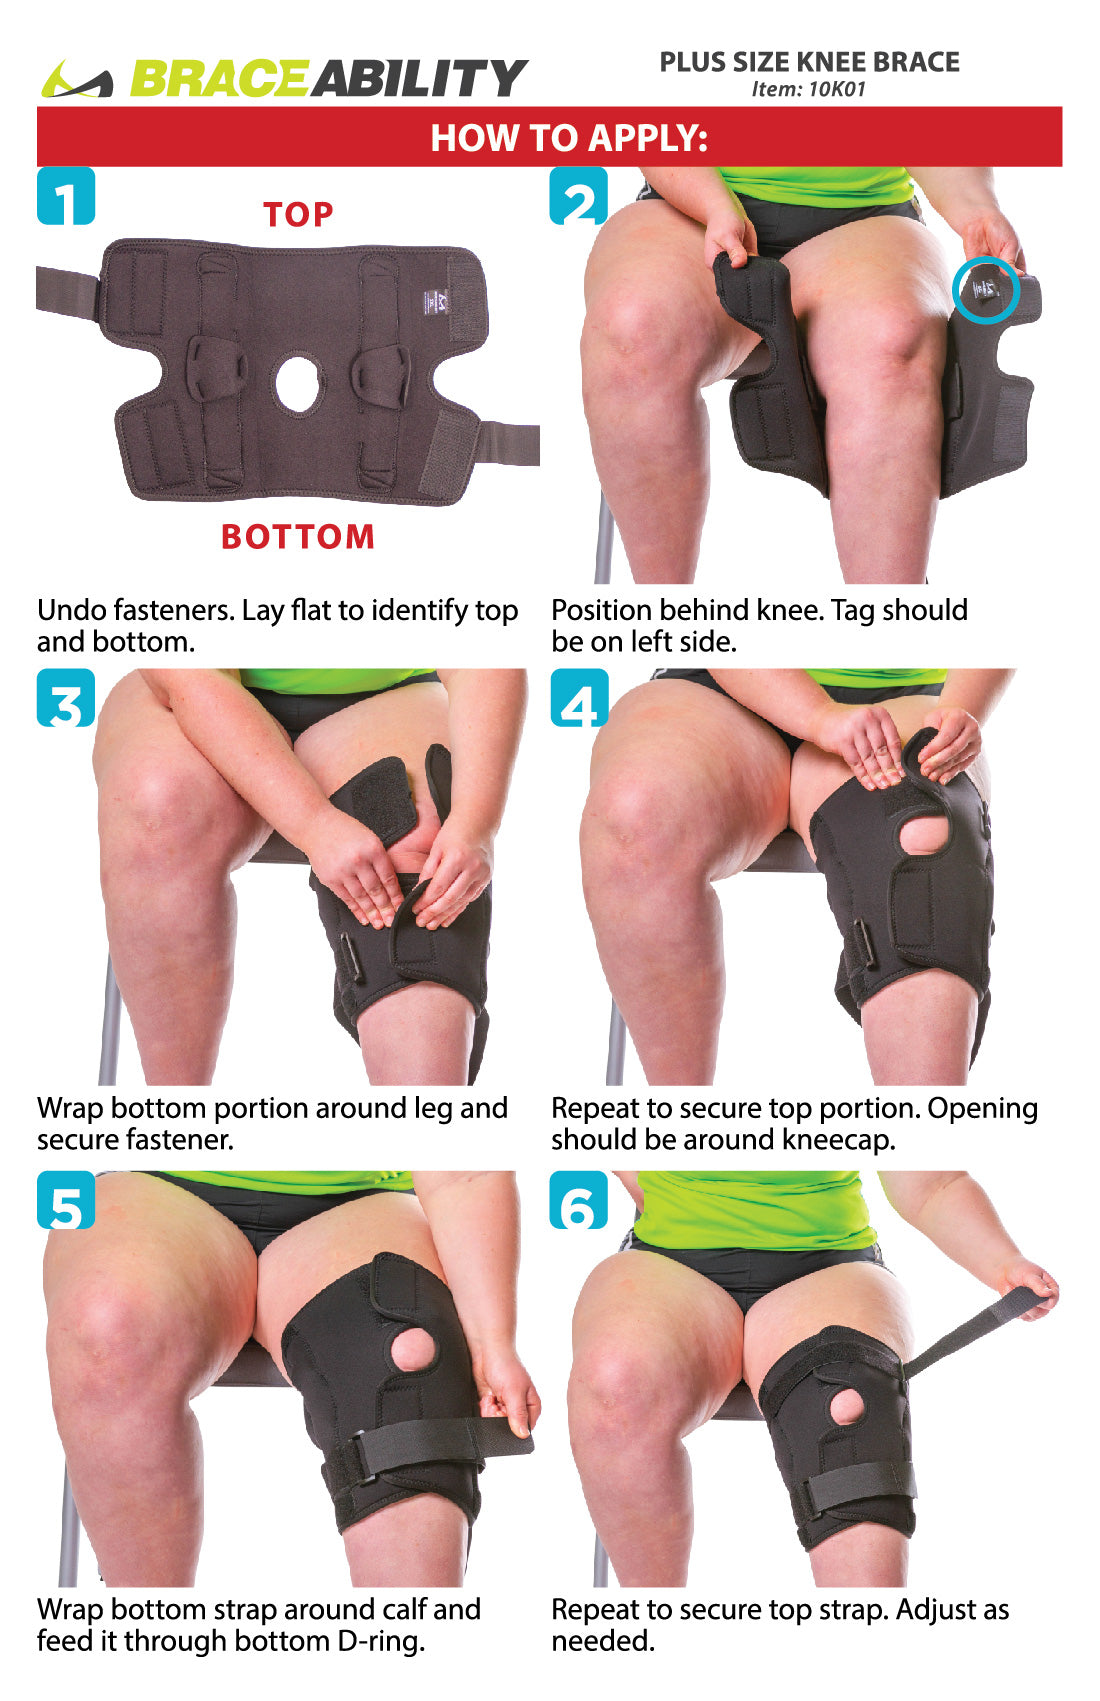 the instruction sheet for the plus size knee brace is a simple wrap around style